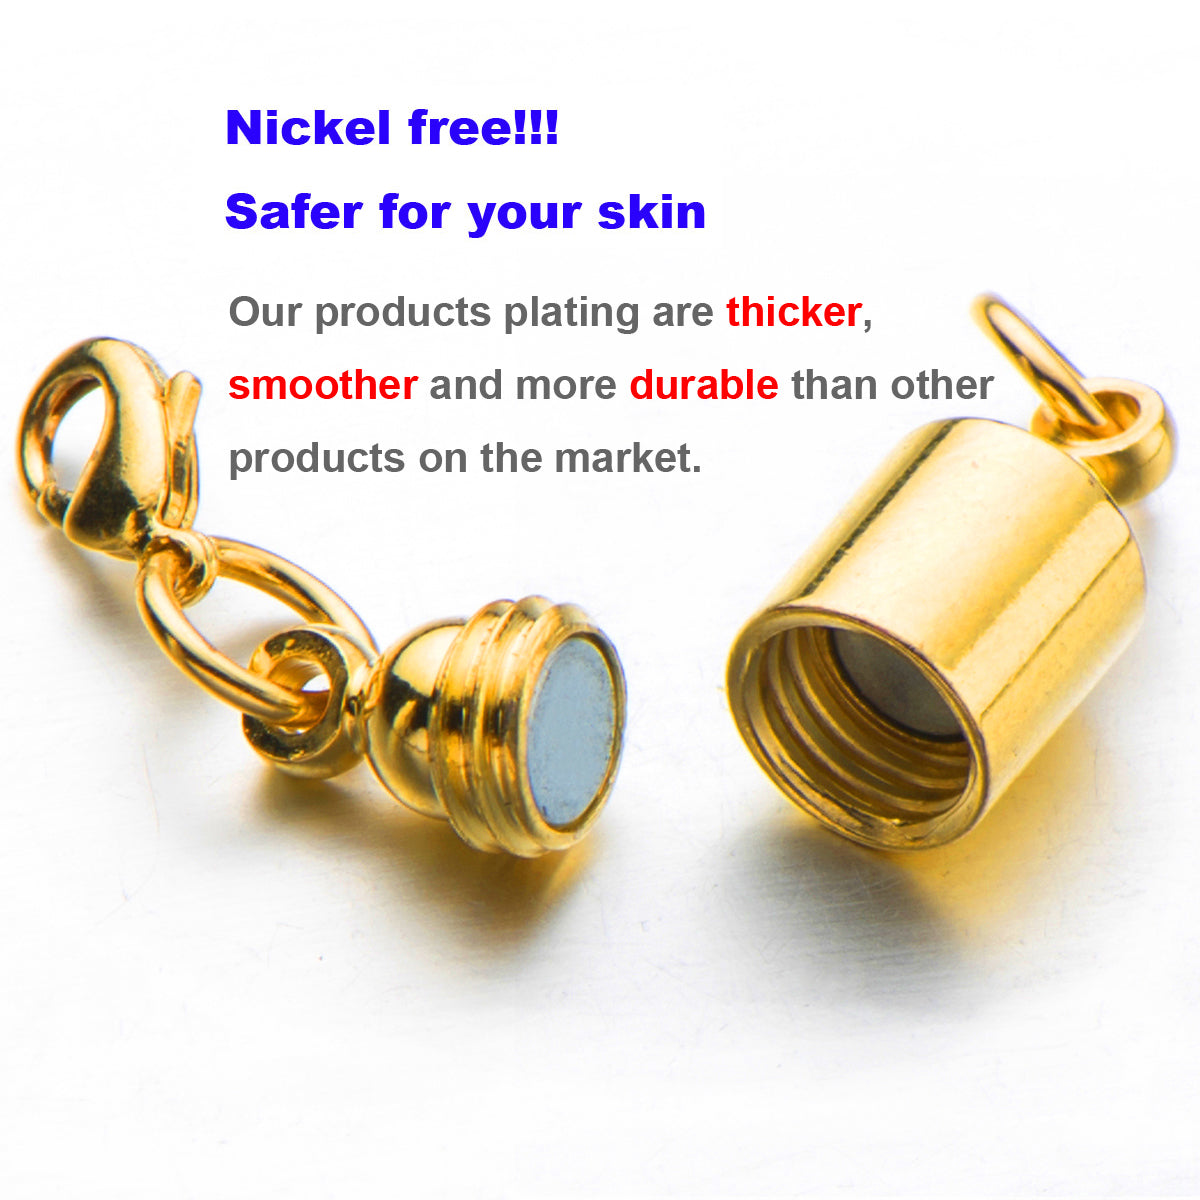 Screw Locking Magnetic Clasps Closures Safety Easy Jewelry Clasps